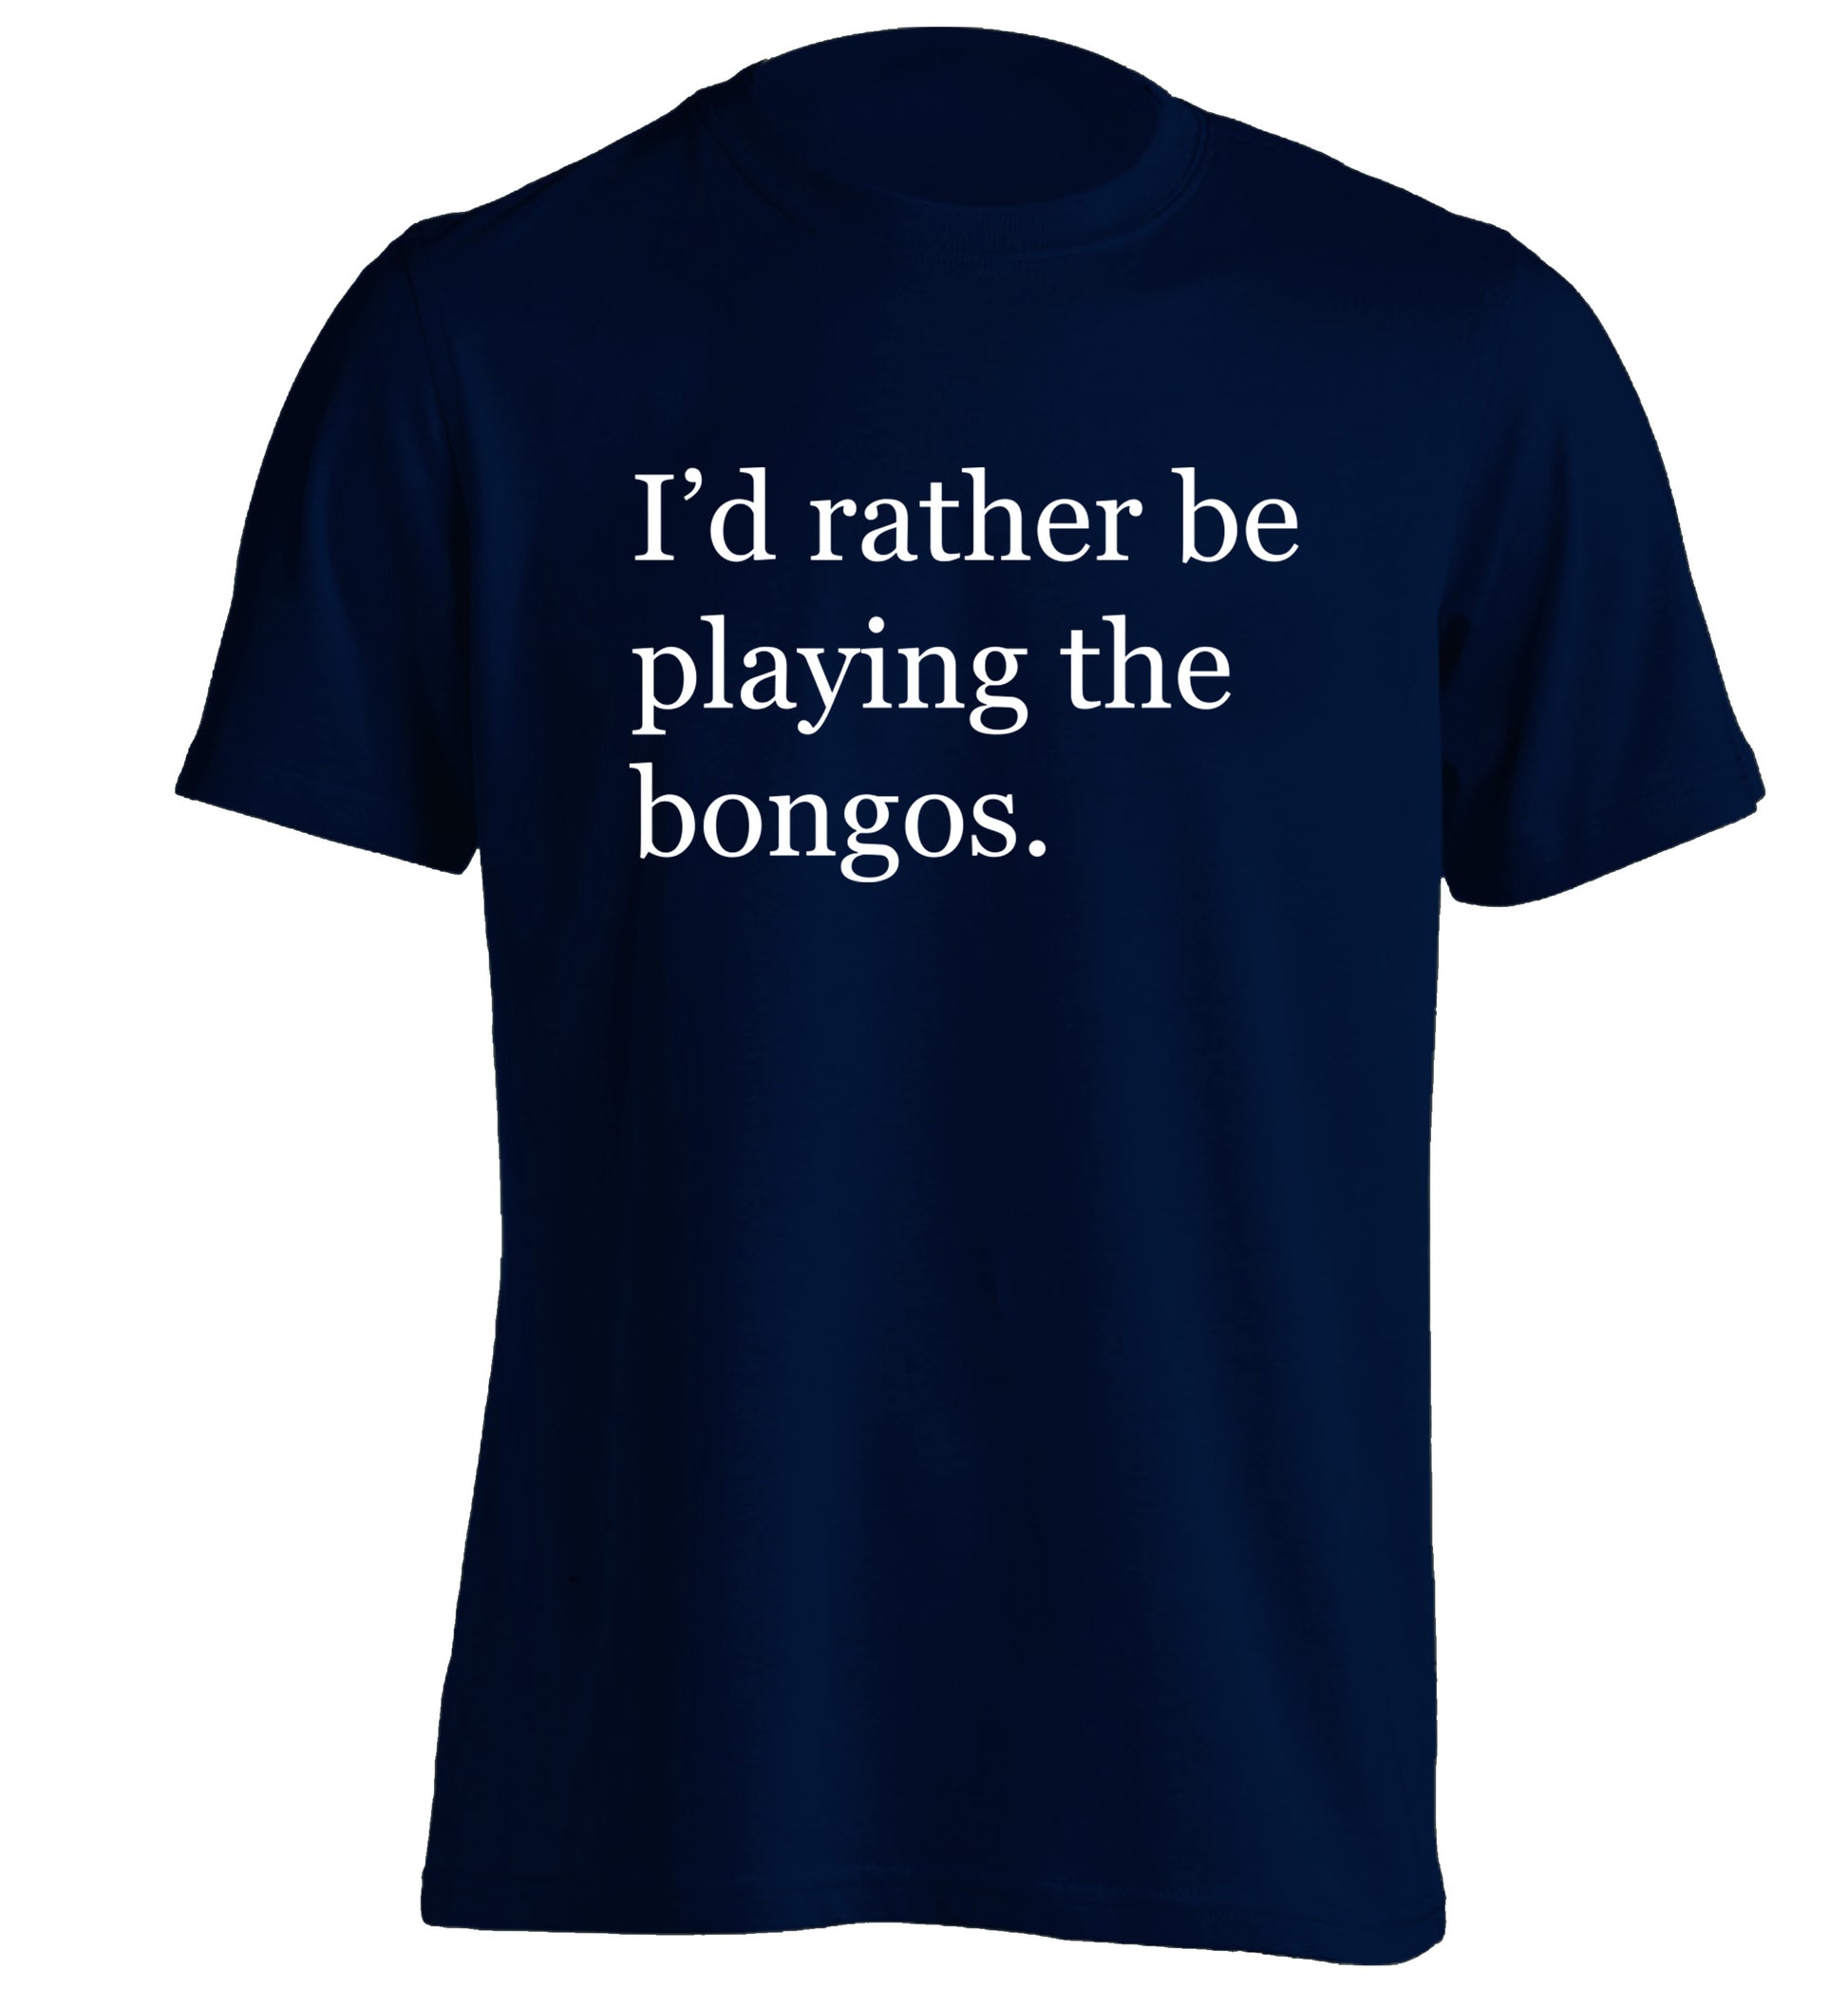 I'd rather be playing the bongos adults unisexnavy Tshirt 2XL